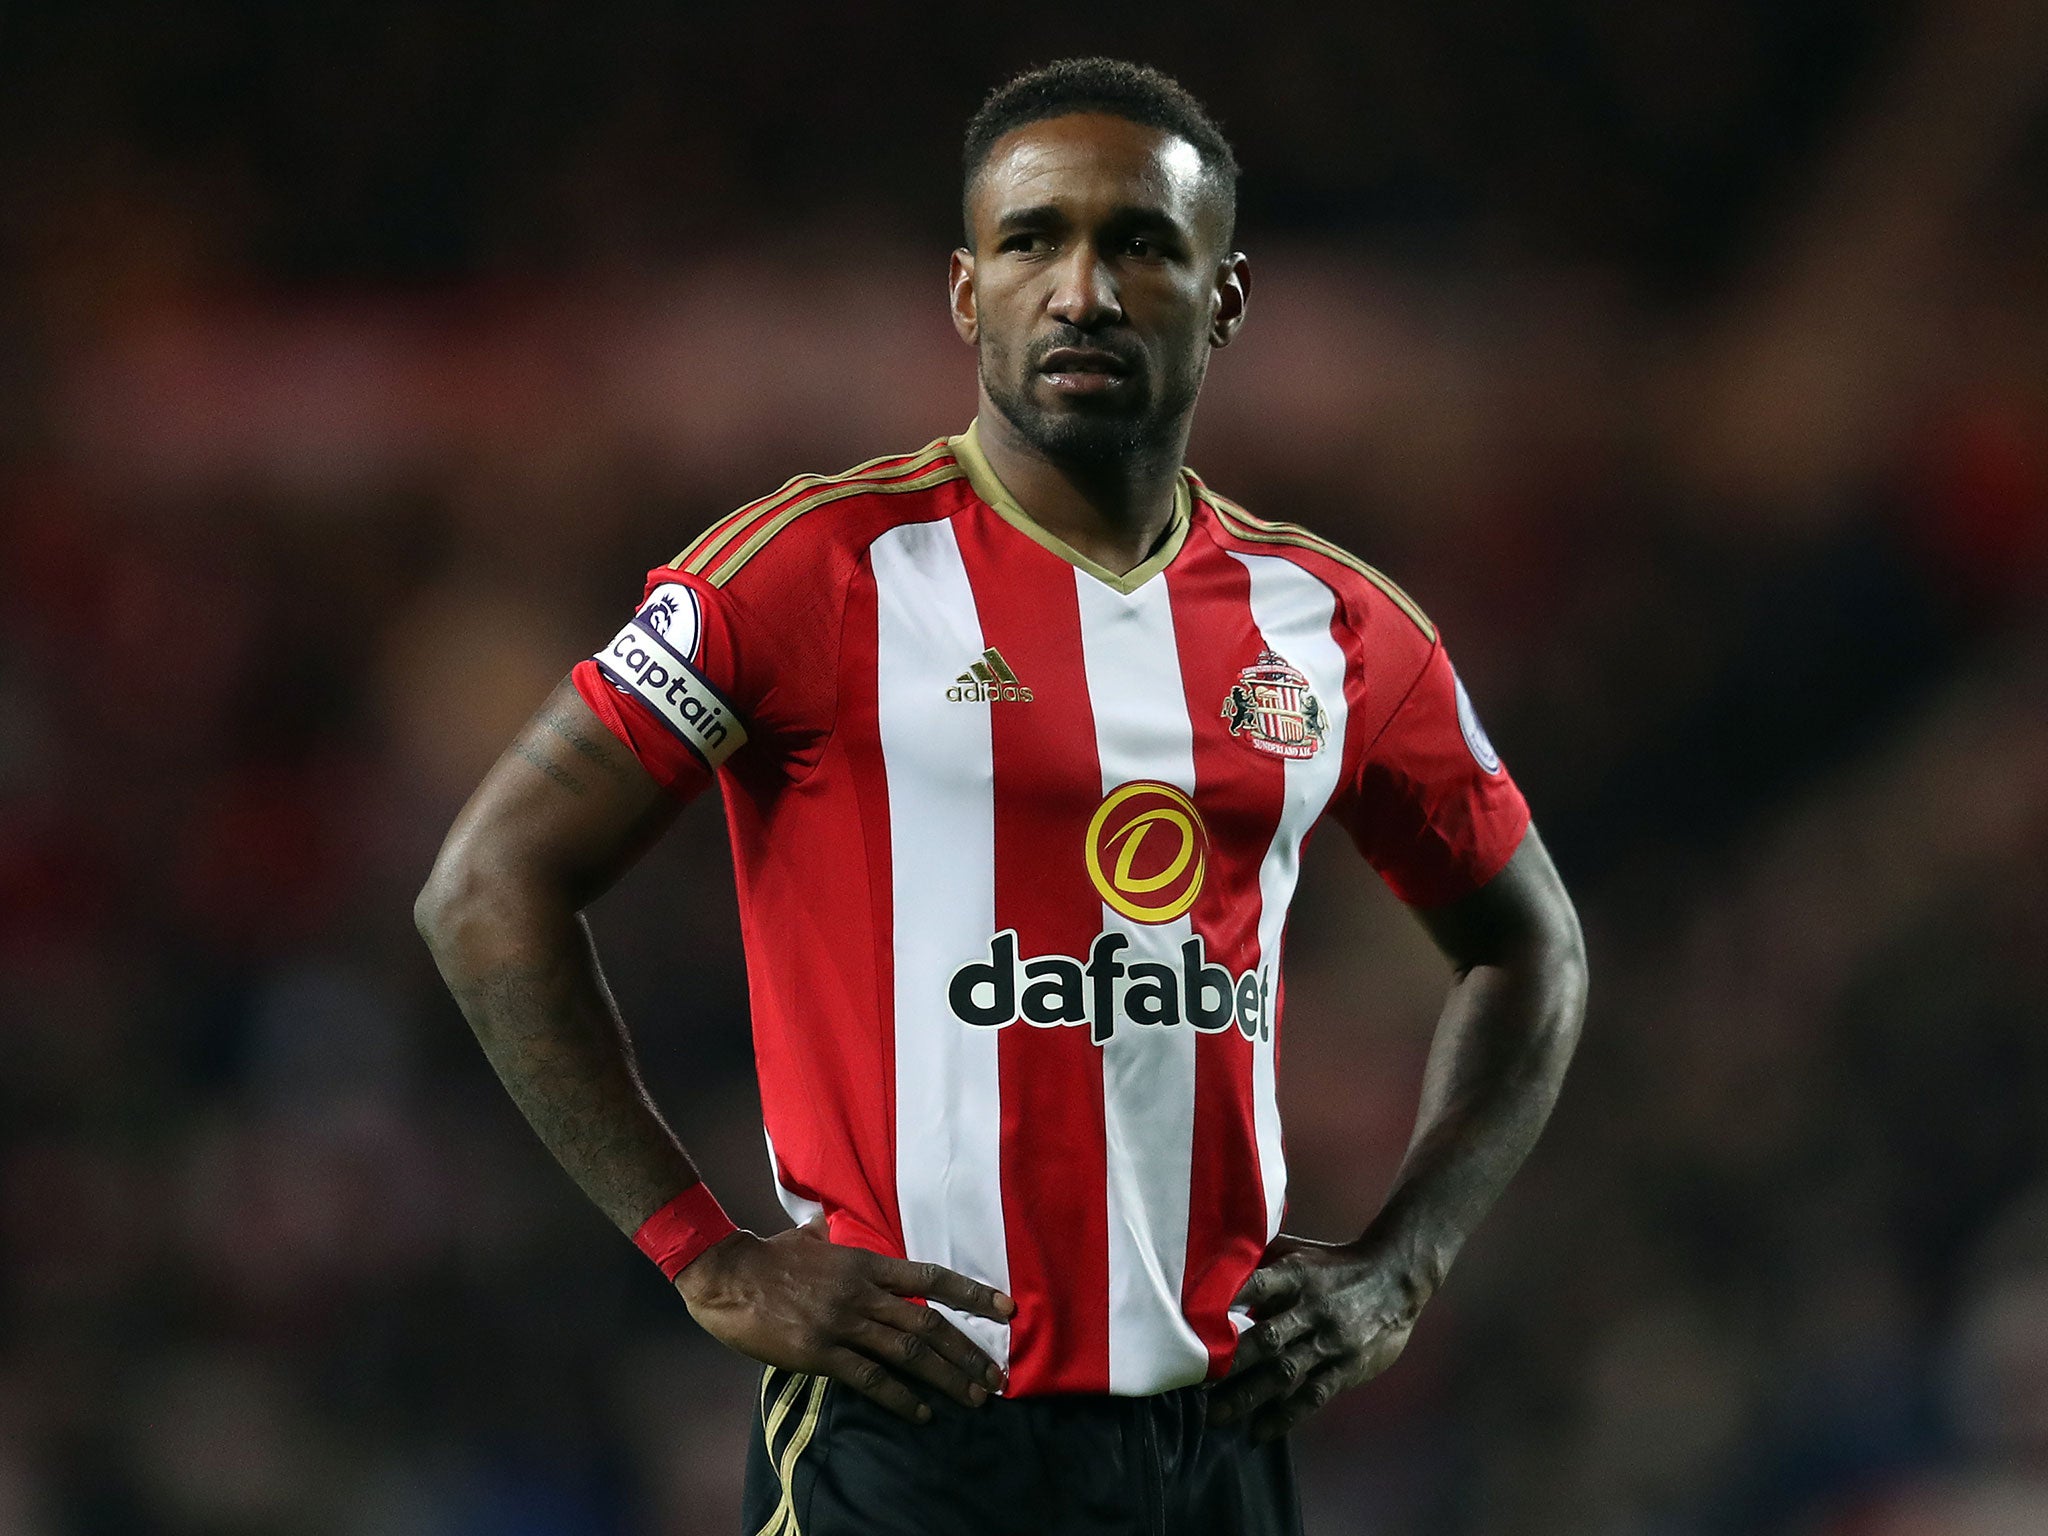 Jermain Defoe's teetotal lifestyle and disciplined diet helps keep him firing on all cylinders in the Premier League